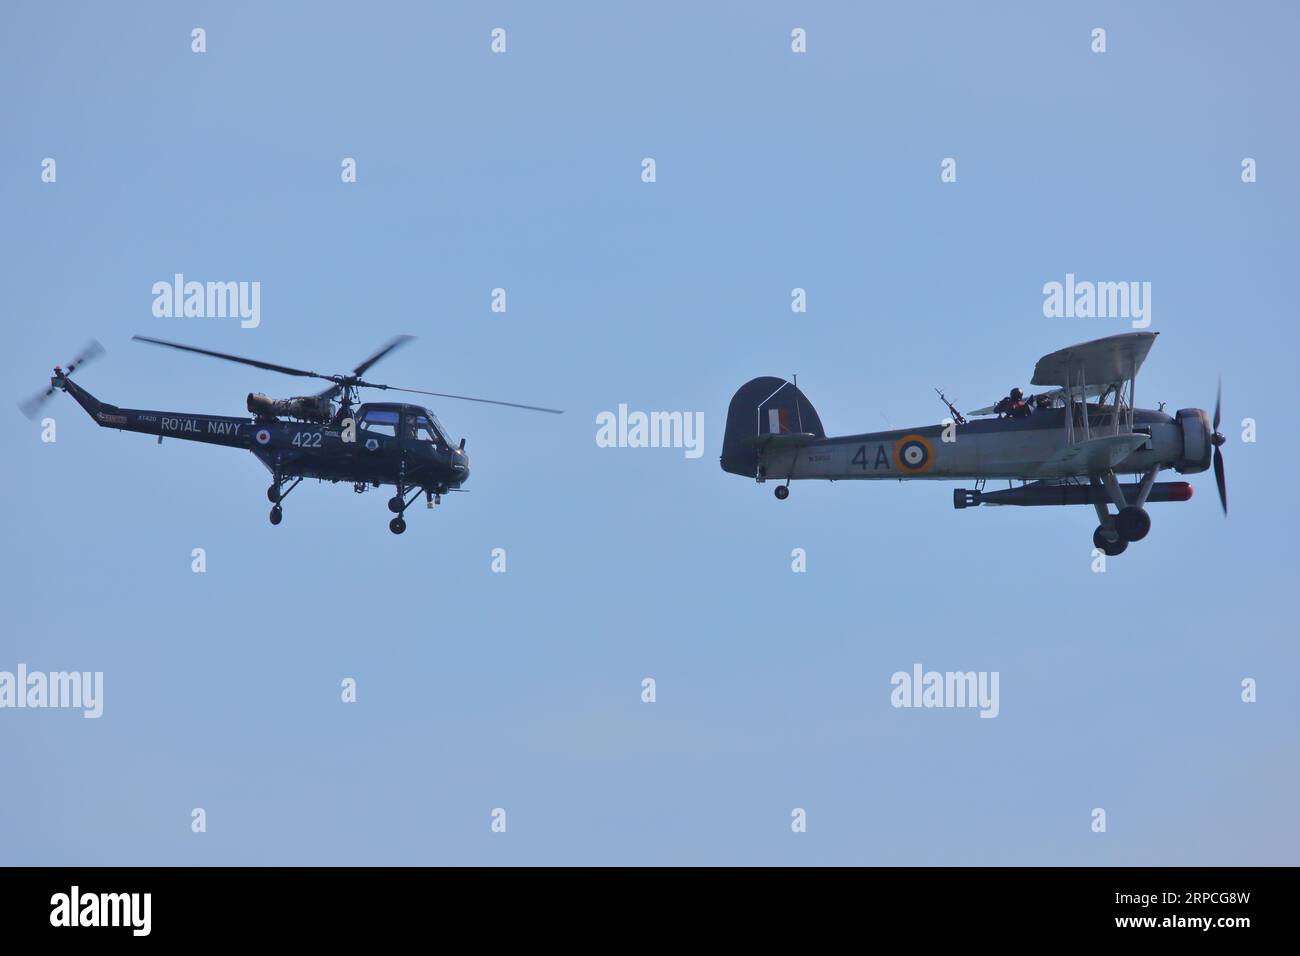 A Westland Wasp helicopter and a Royal Navy Fairey Swordfish torpedo bomber performing their routine at the Bournemouth Air Festival 2023, Bournemouth, UK Stock Photo